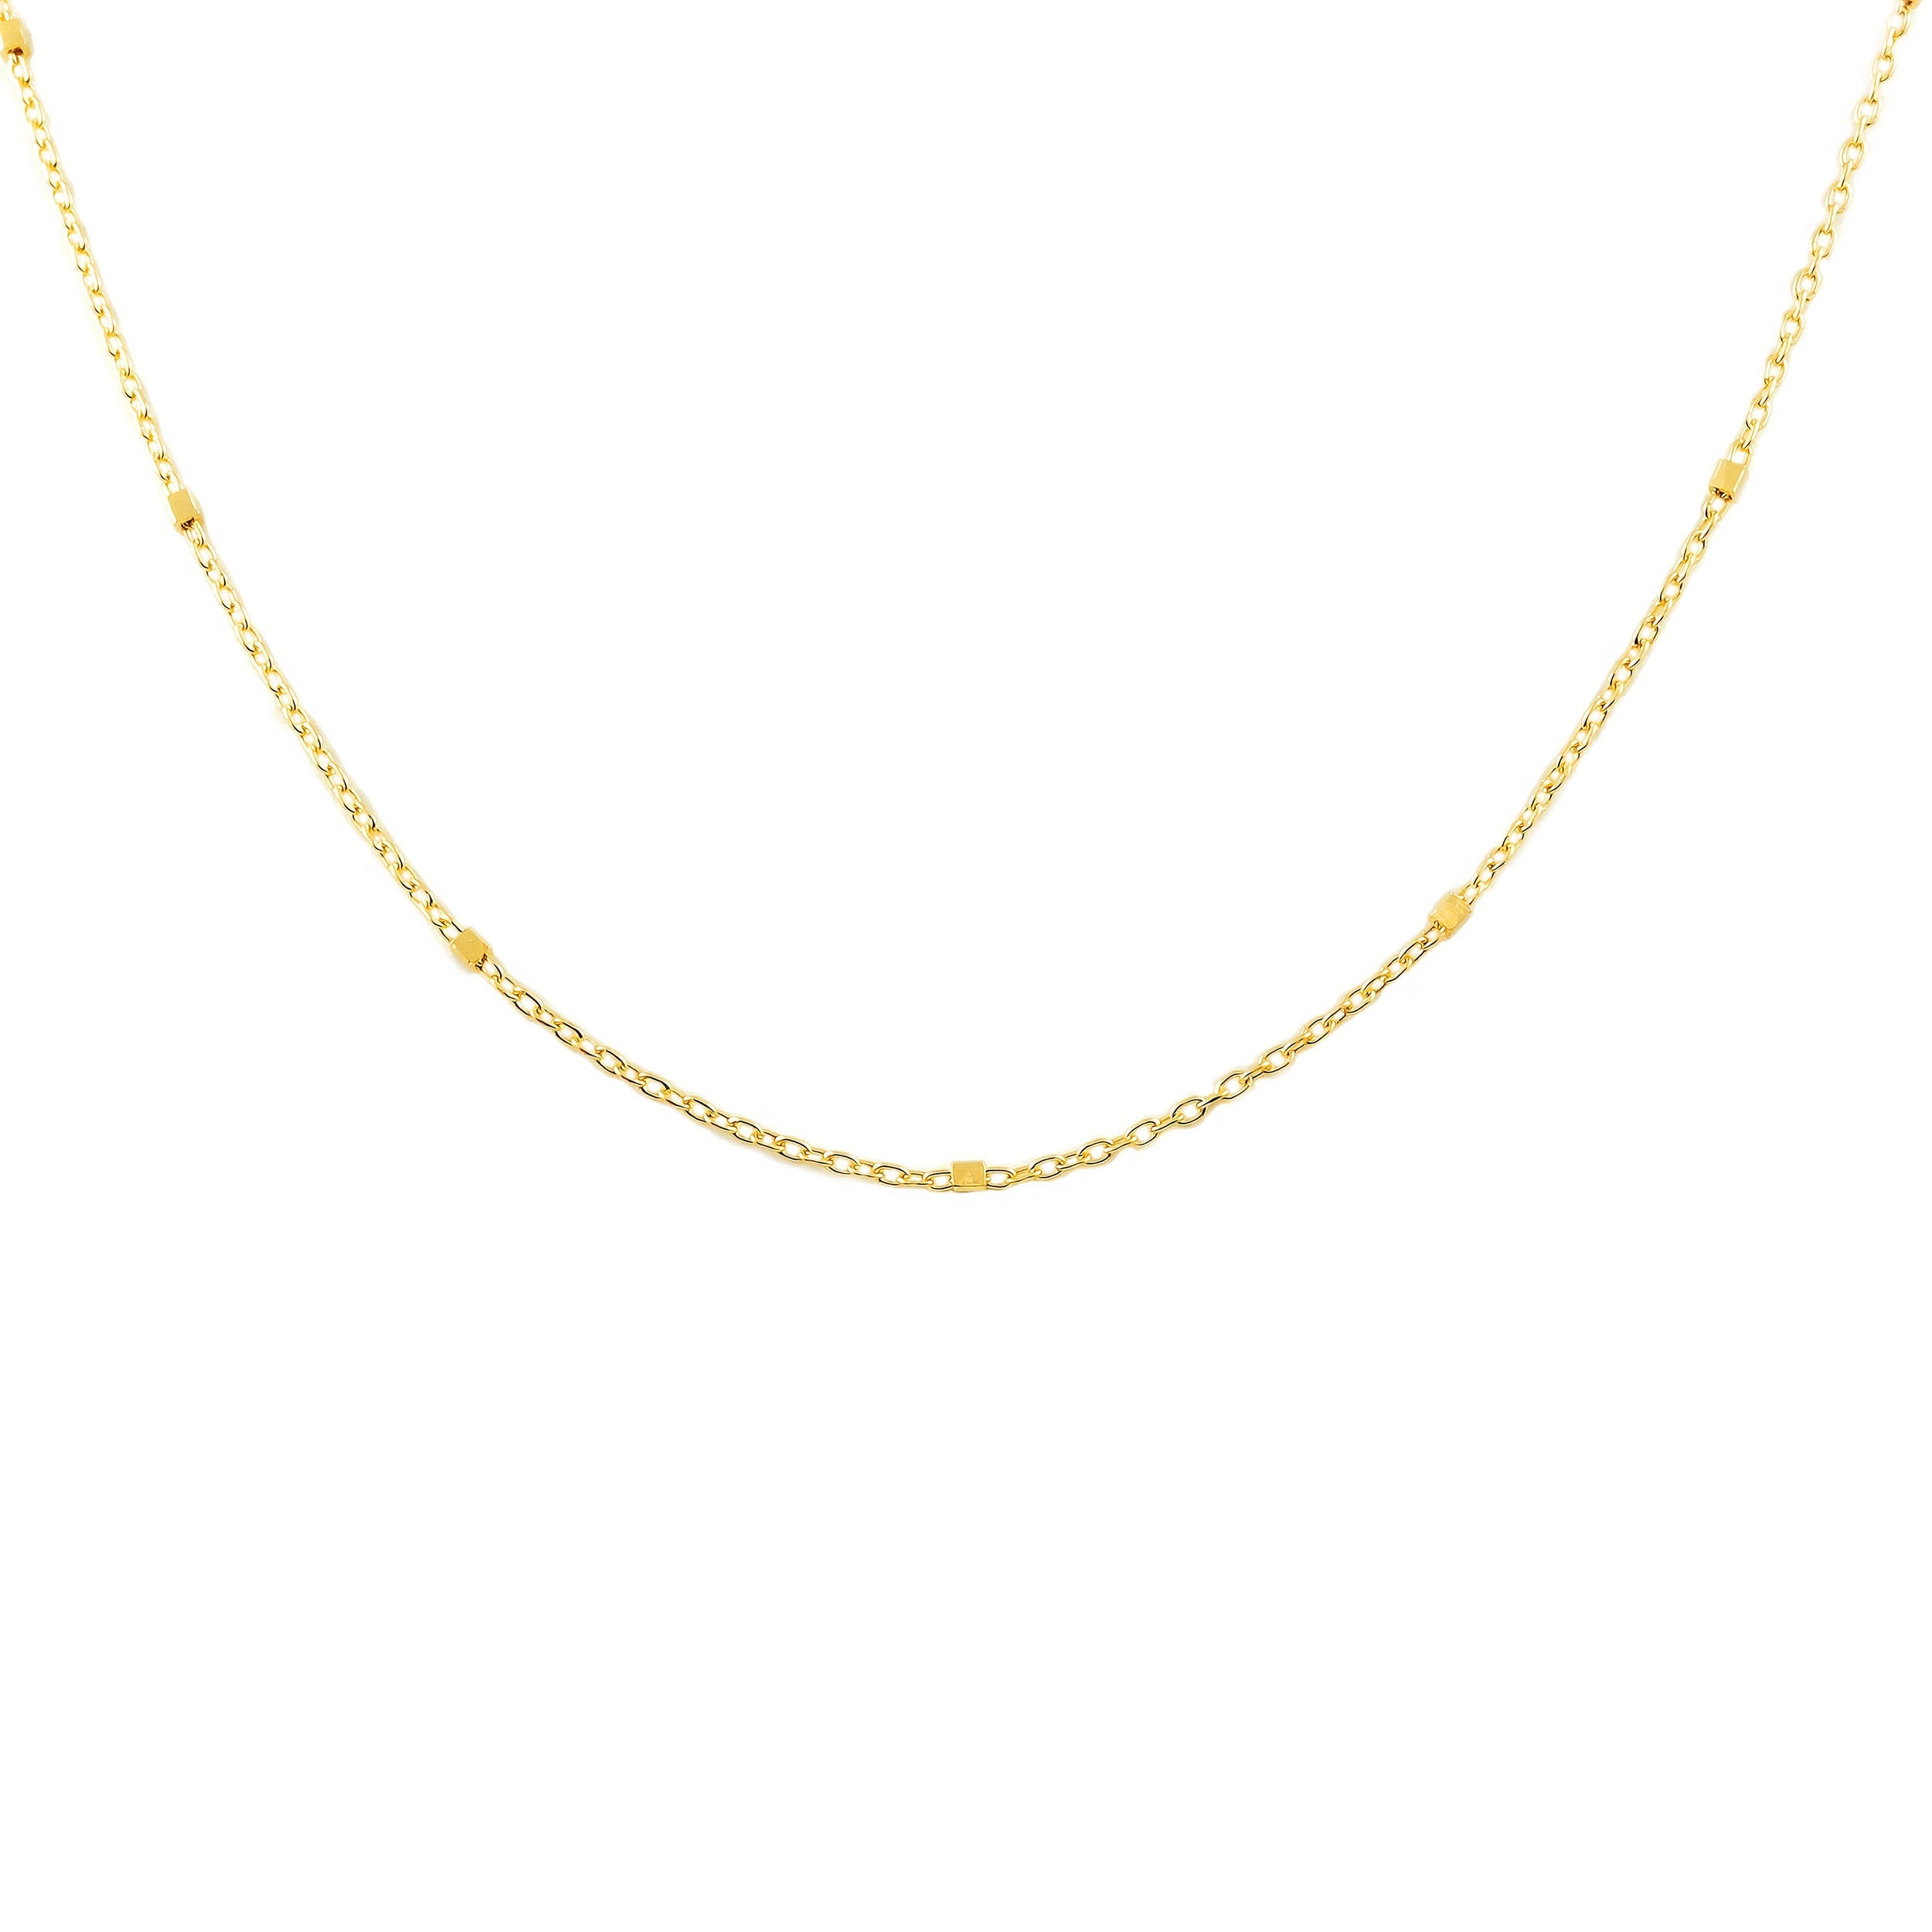 18K Yellow Gold Chain Square Spacer